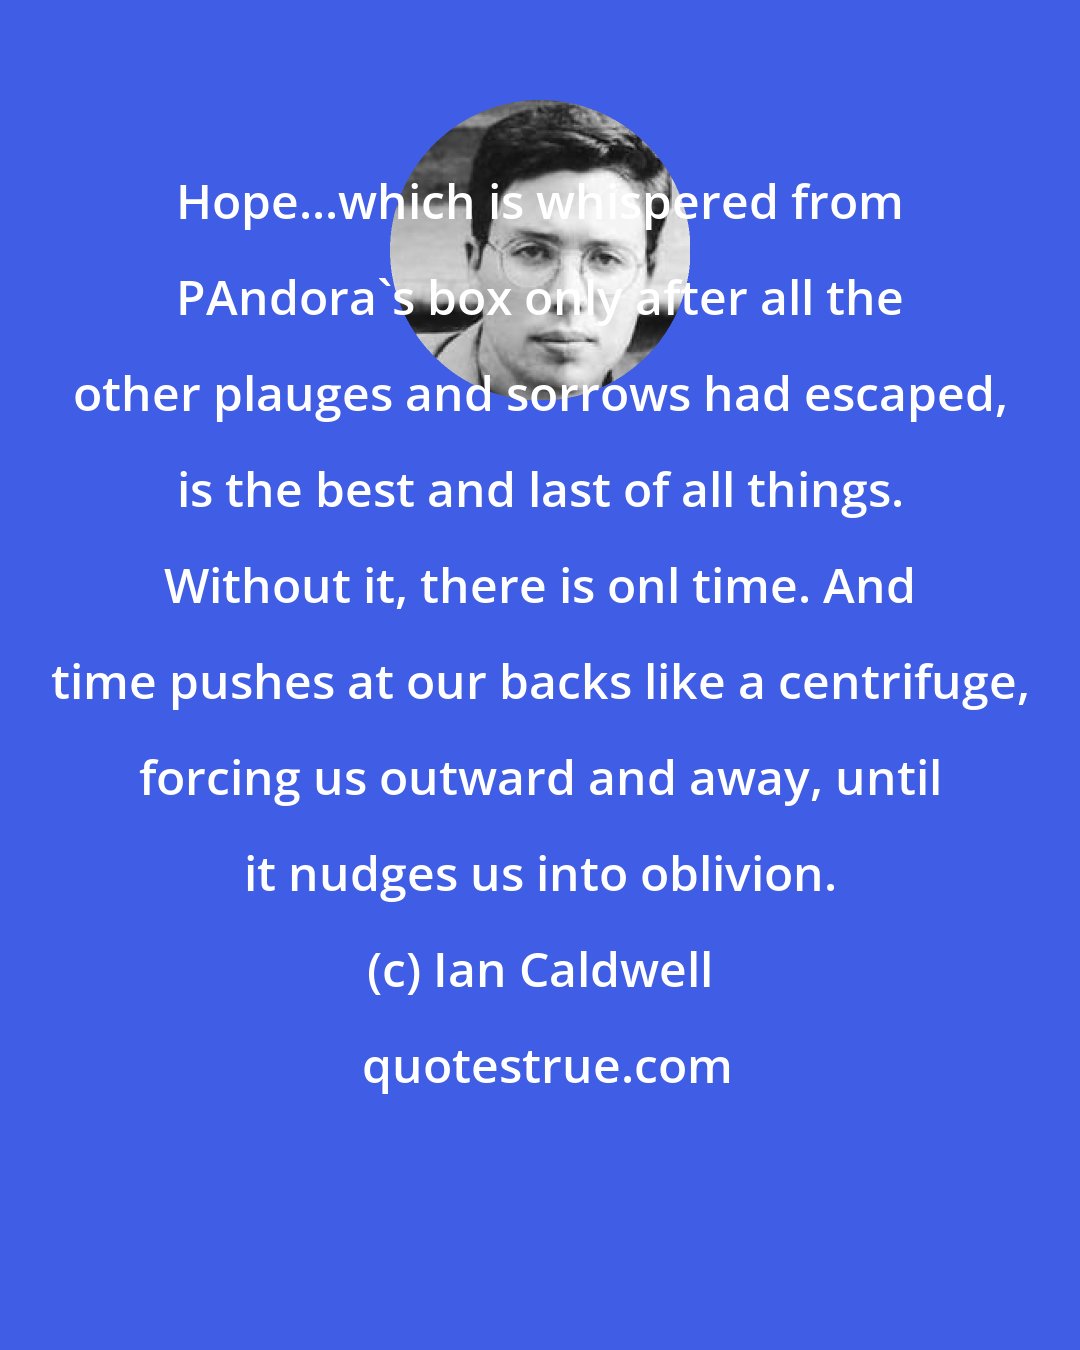 Ian Caldwell: Hope...which is whispered from PAndora's box only after all the other plauges and sorrows had escaped, is the best and last of all things. Without it, there is onl time. And time pushes at our backs like a centrifuge, forcing us outward and away, until it nudges us into oblivion.